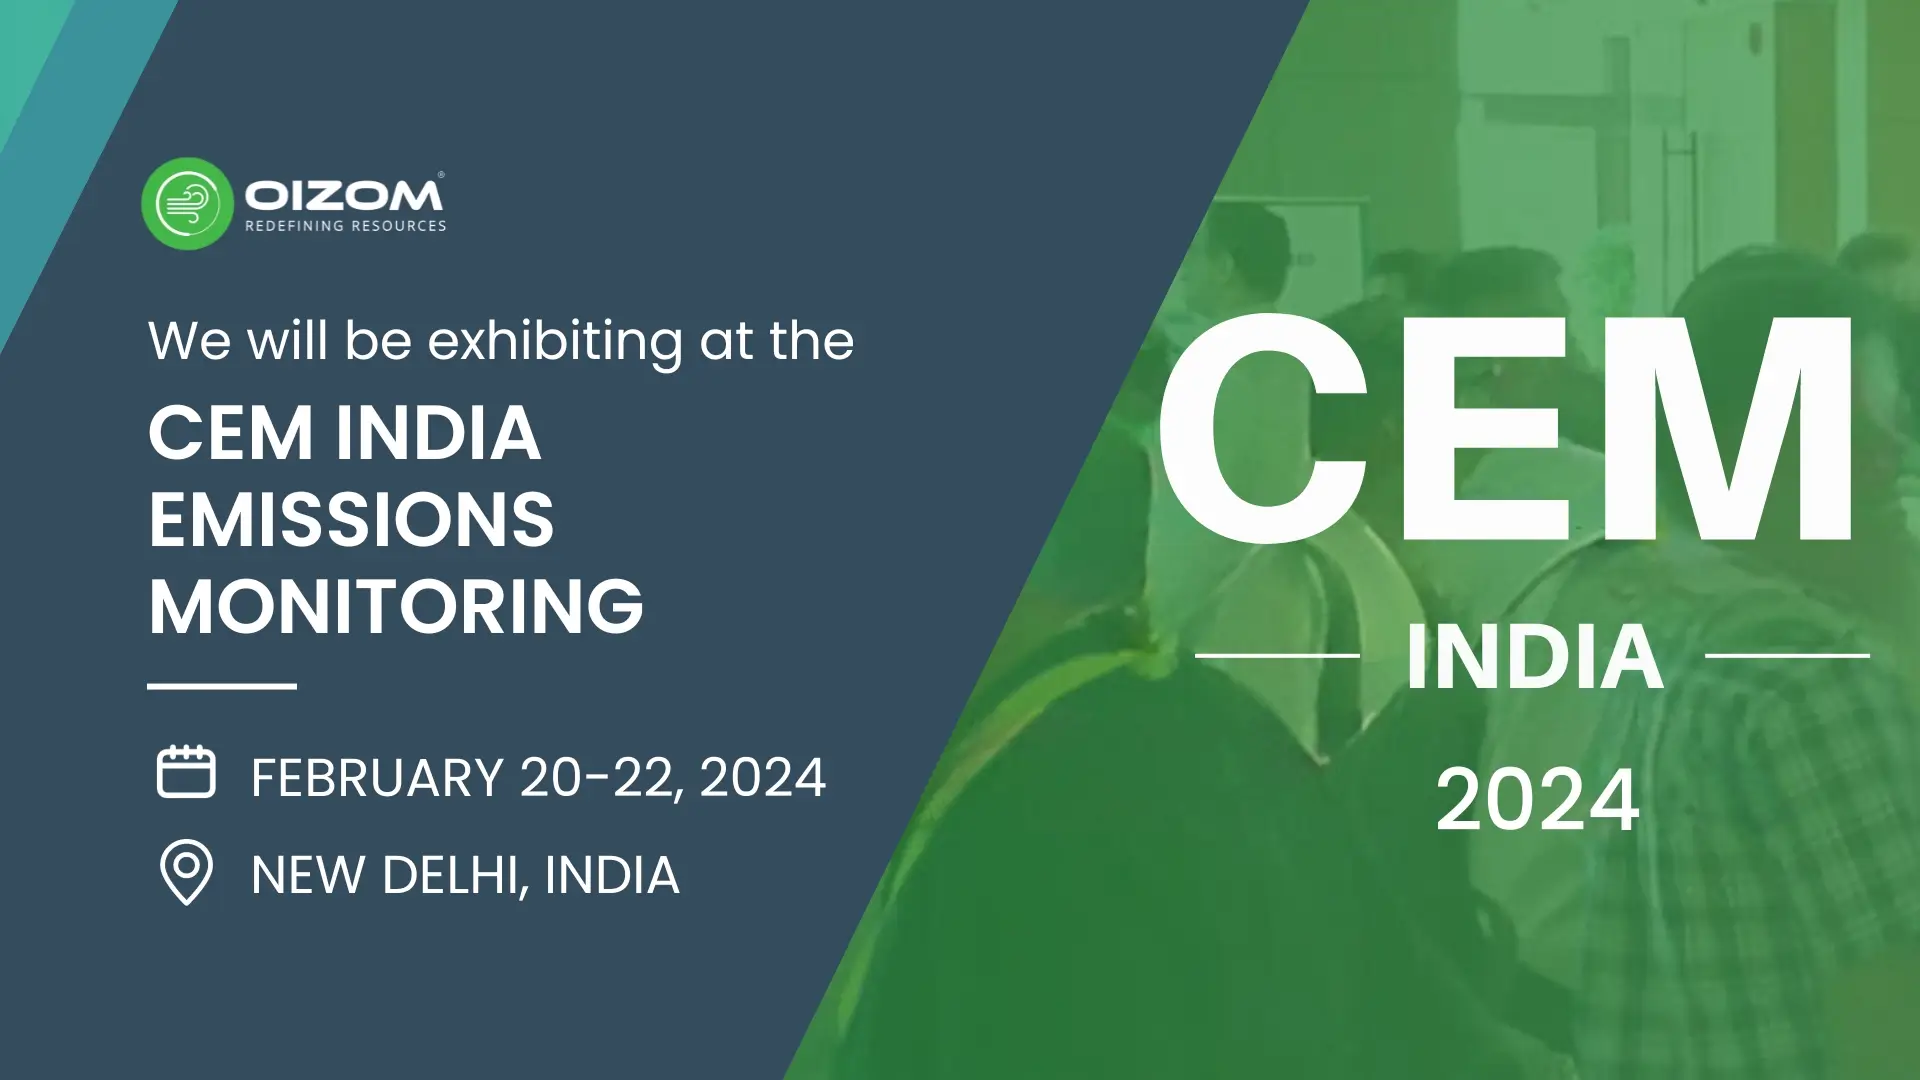 3rd CEM India event in Delhi on the 20th-22nd February 2024.